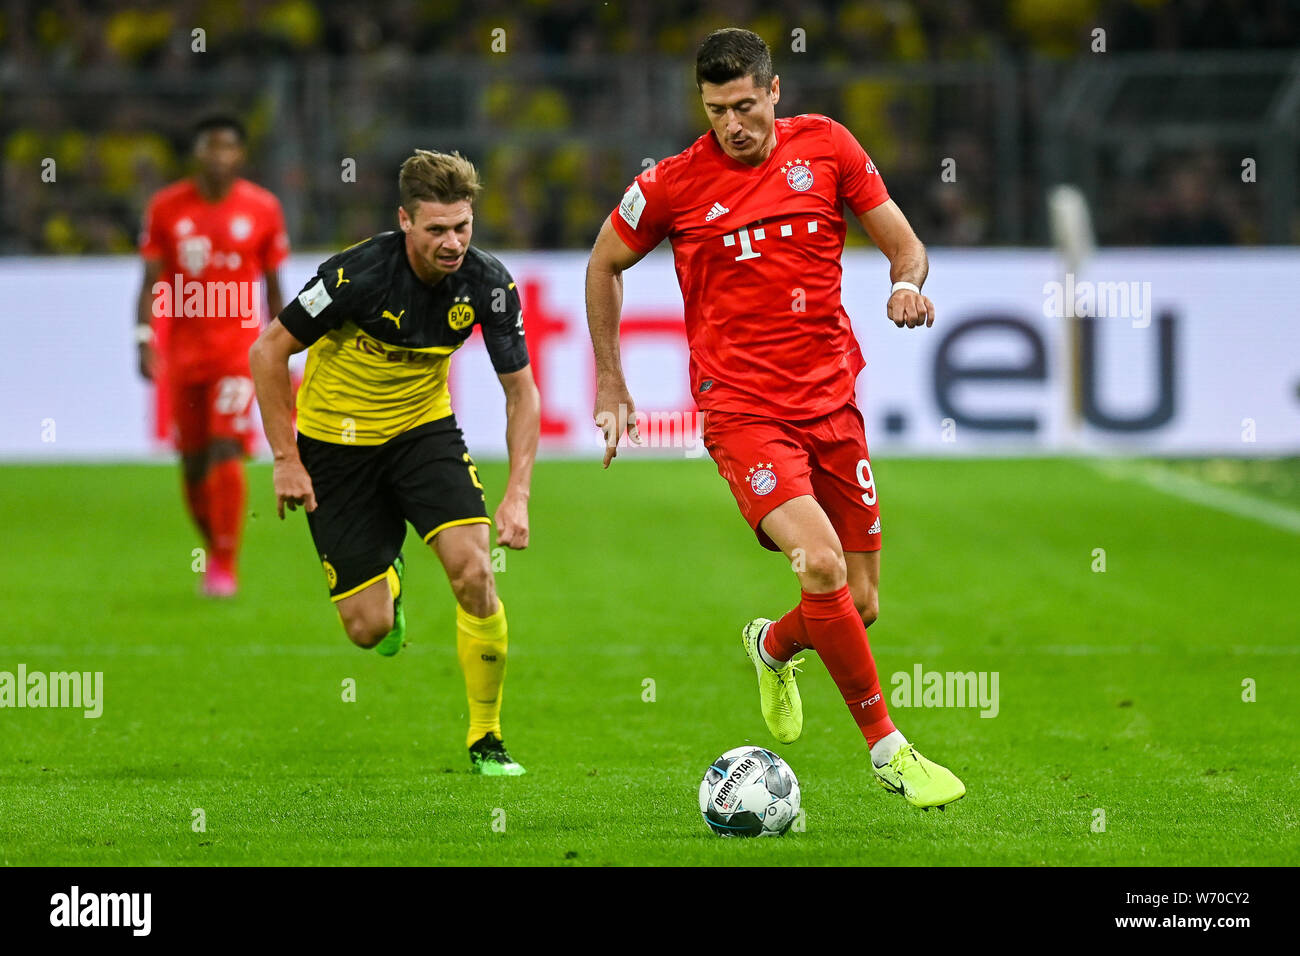 Lukasz Piszczek from Borussia Dortmund (L) and Robert Lewandowski from Bayern Munich (R) are seen in action during the Germany Supercup Final 2019 match between Borussia Dortmund and Bayern Munich.(Final score: Borussia Dortmund 2:0 Bayern Munich) Stock Photo